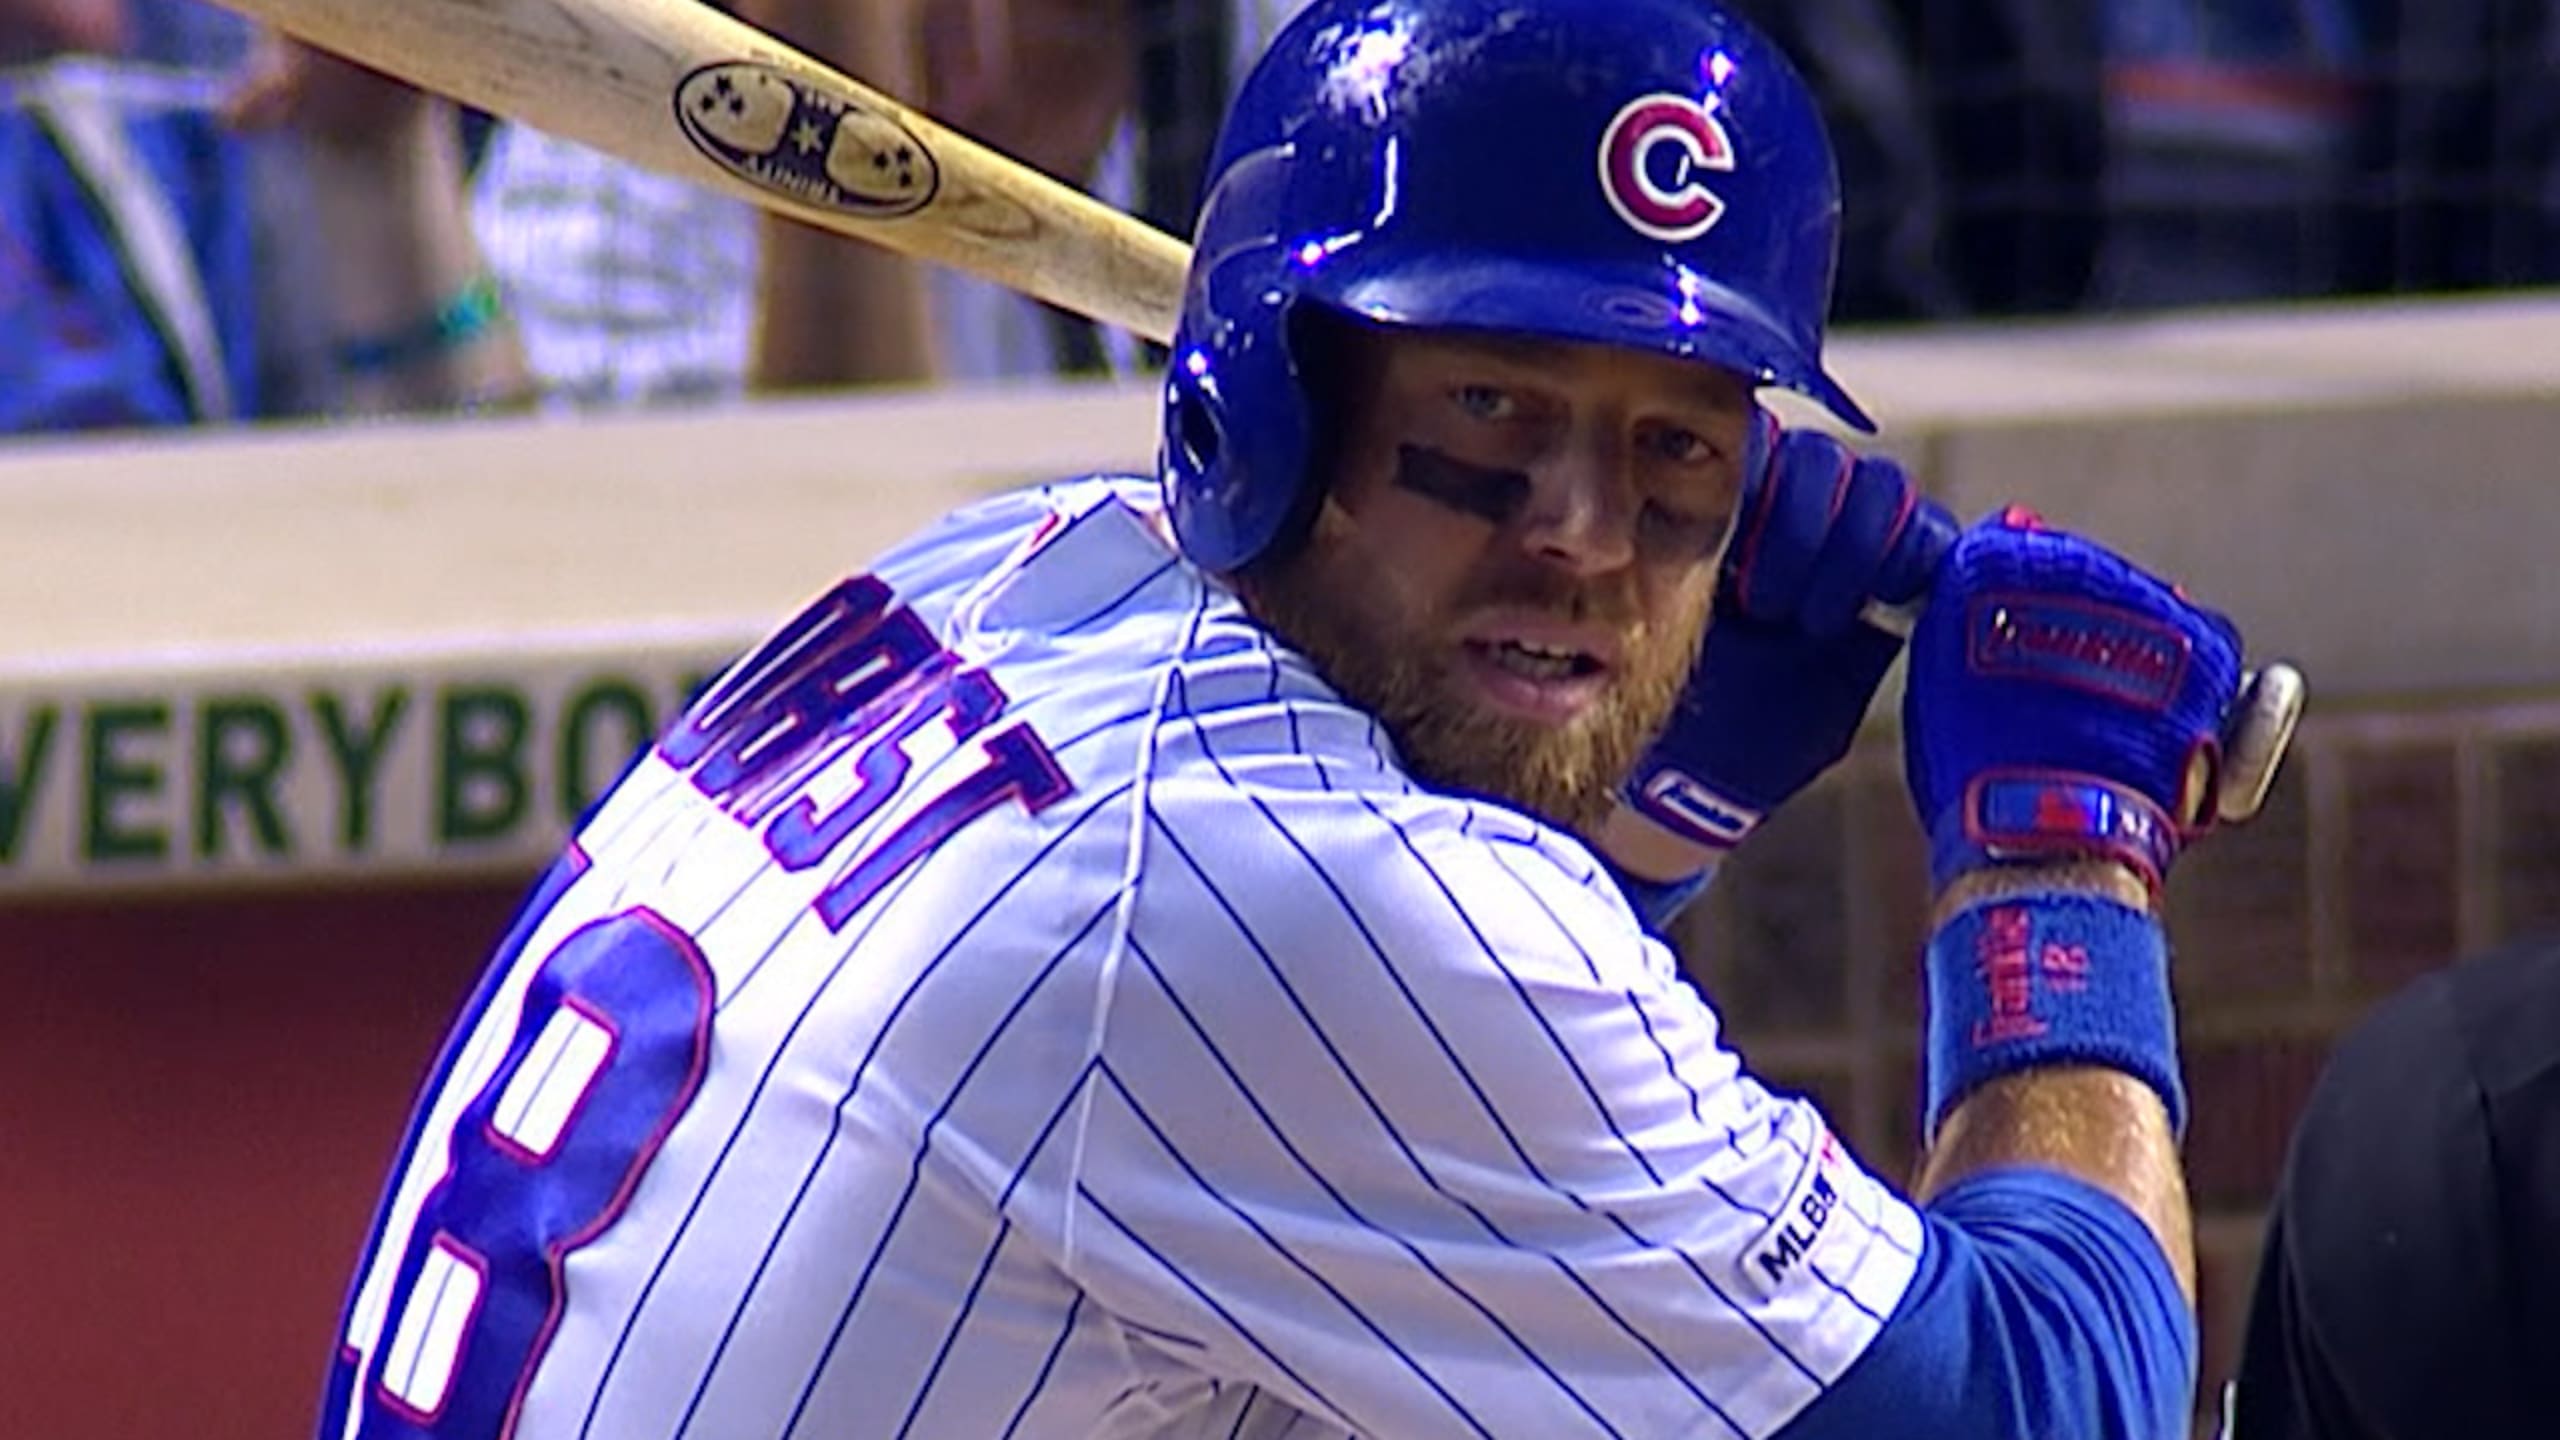 WATCH: Ben Zobrist receives standing ovation before his first at